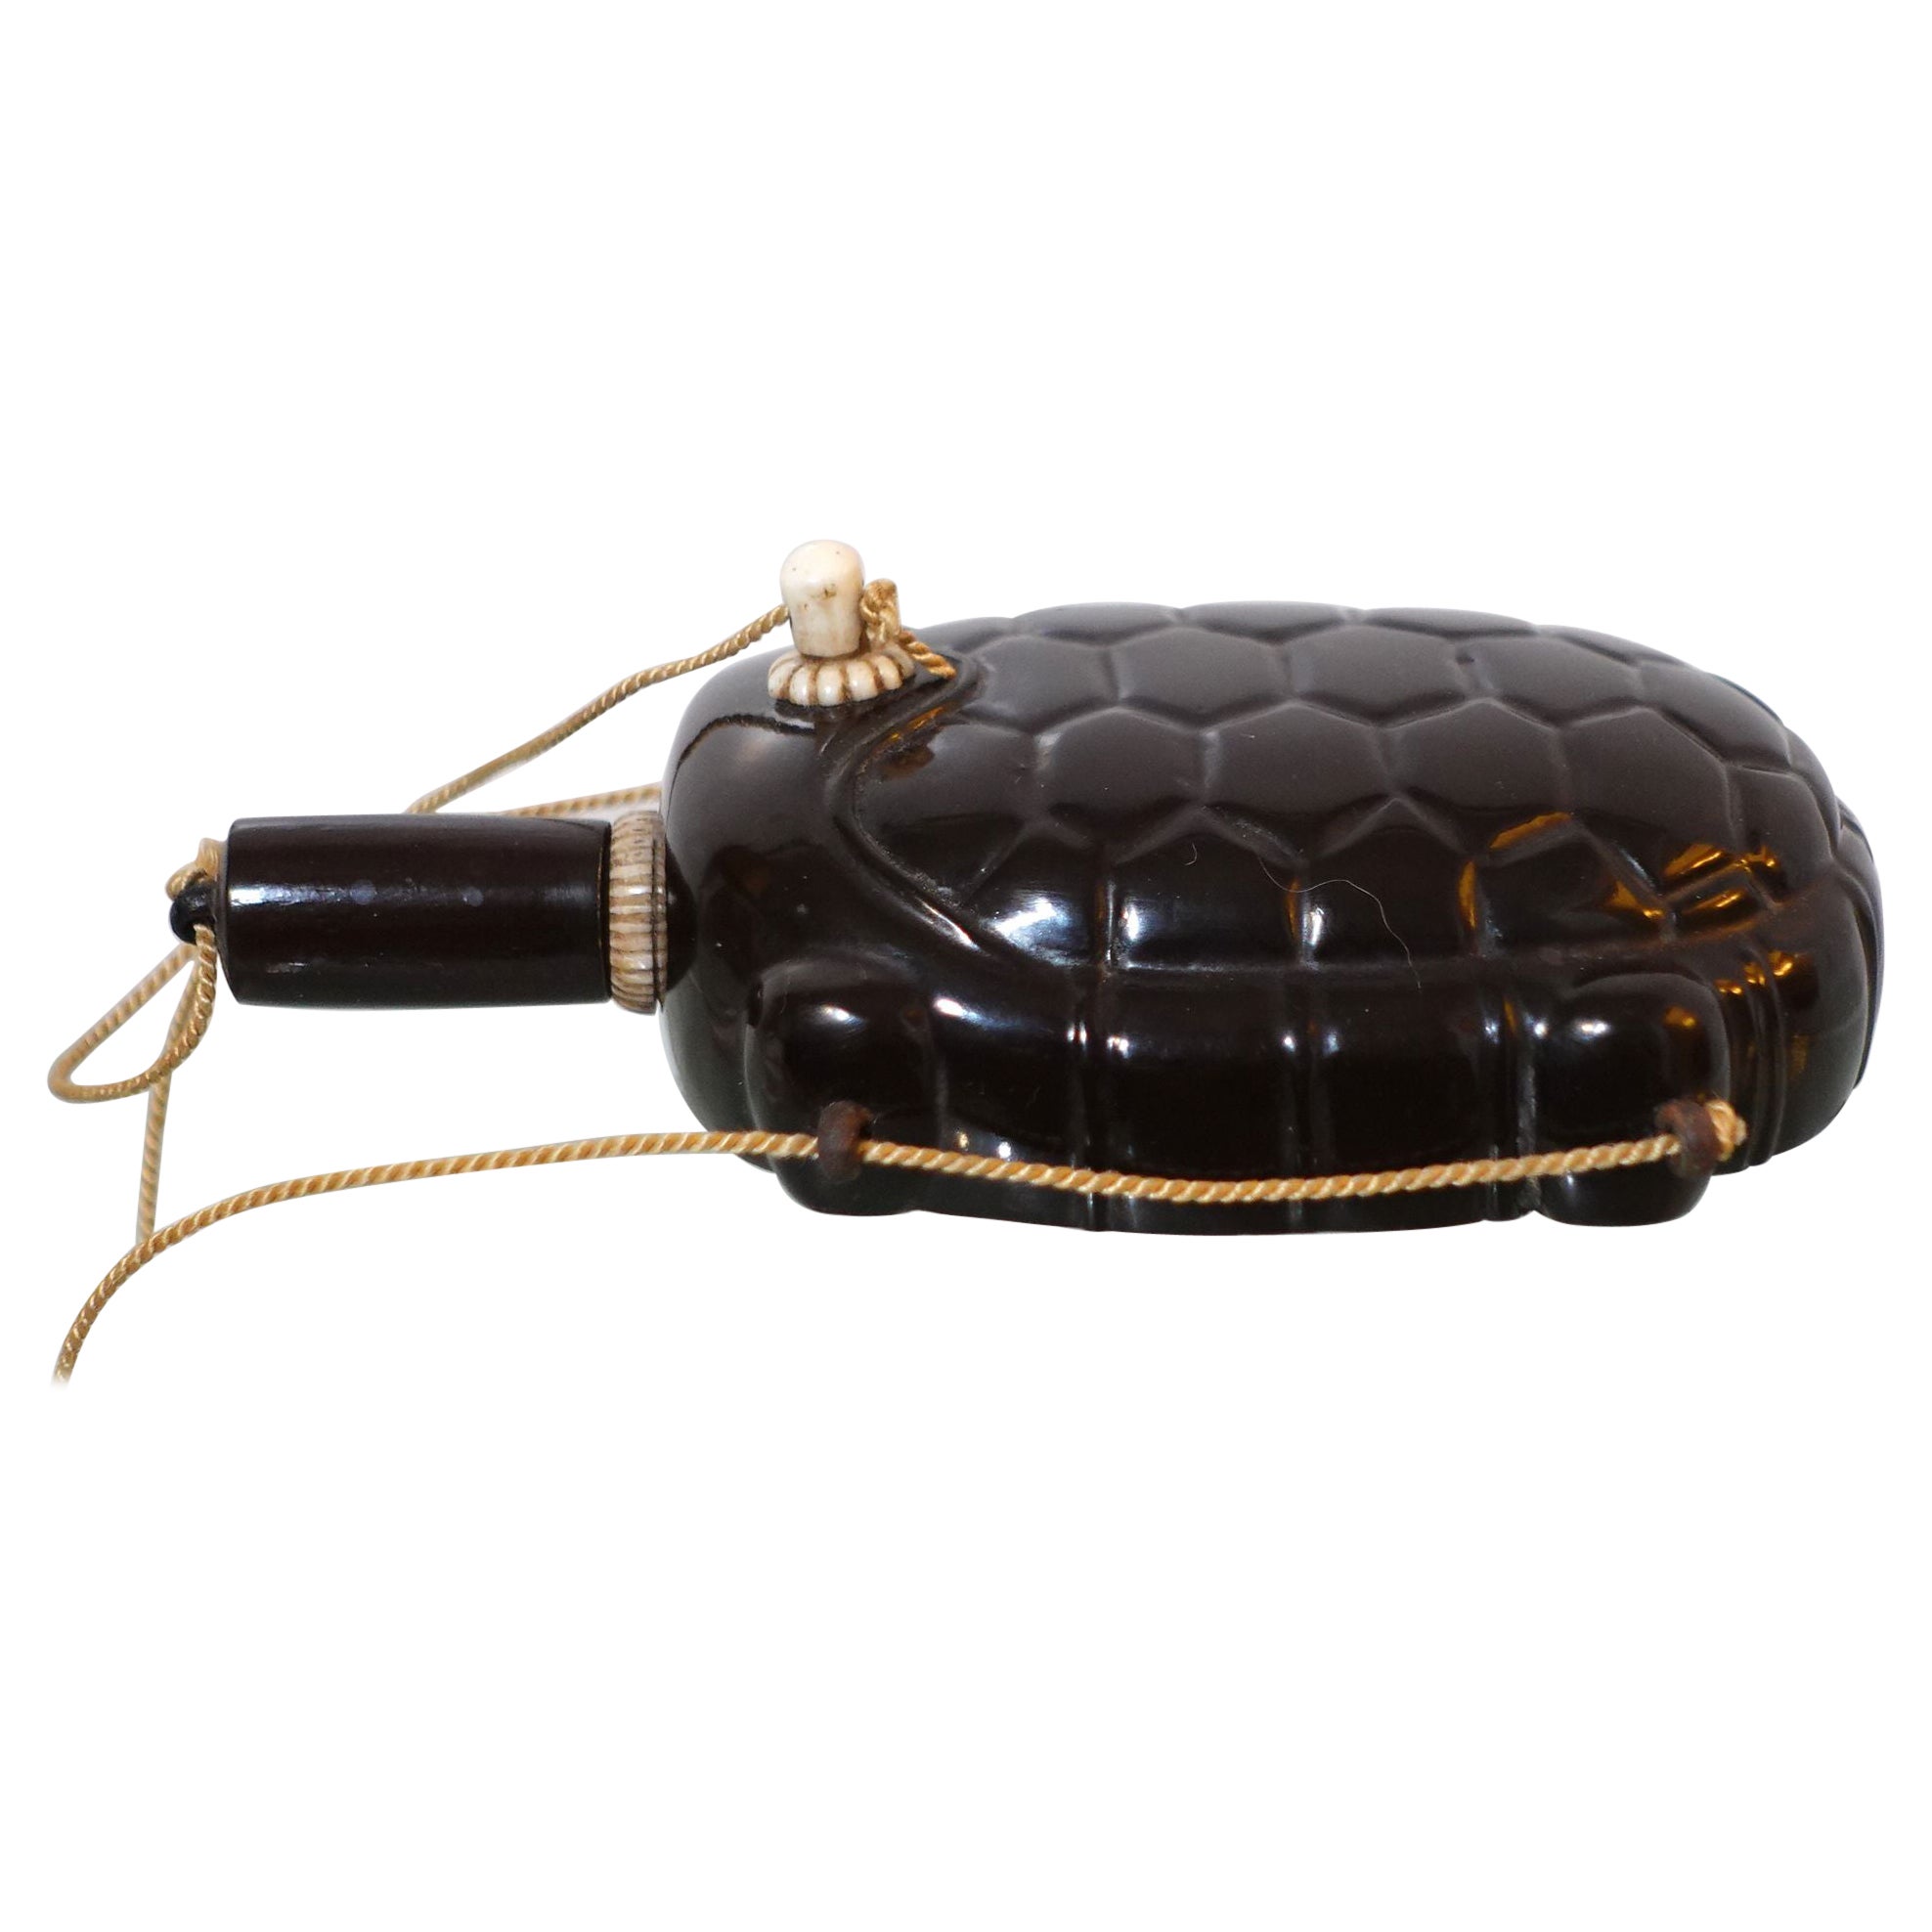 A Unique and lovely lacquer powder horn in the form of a turtle shell from 19th century.